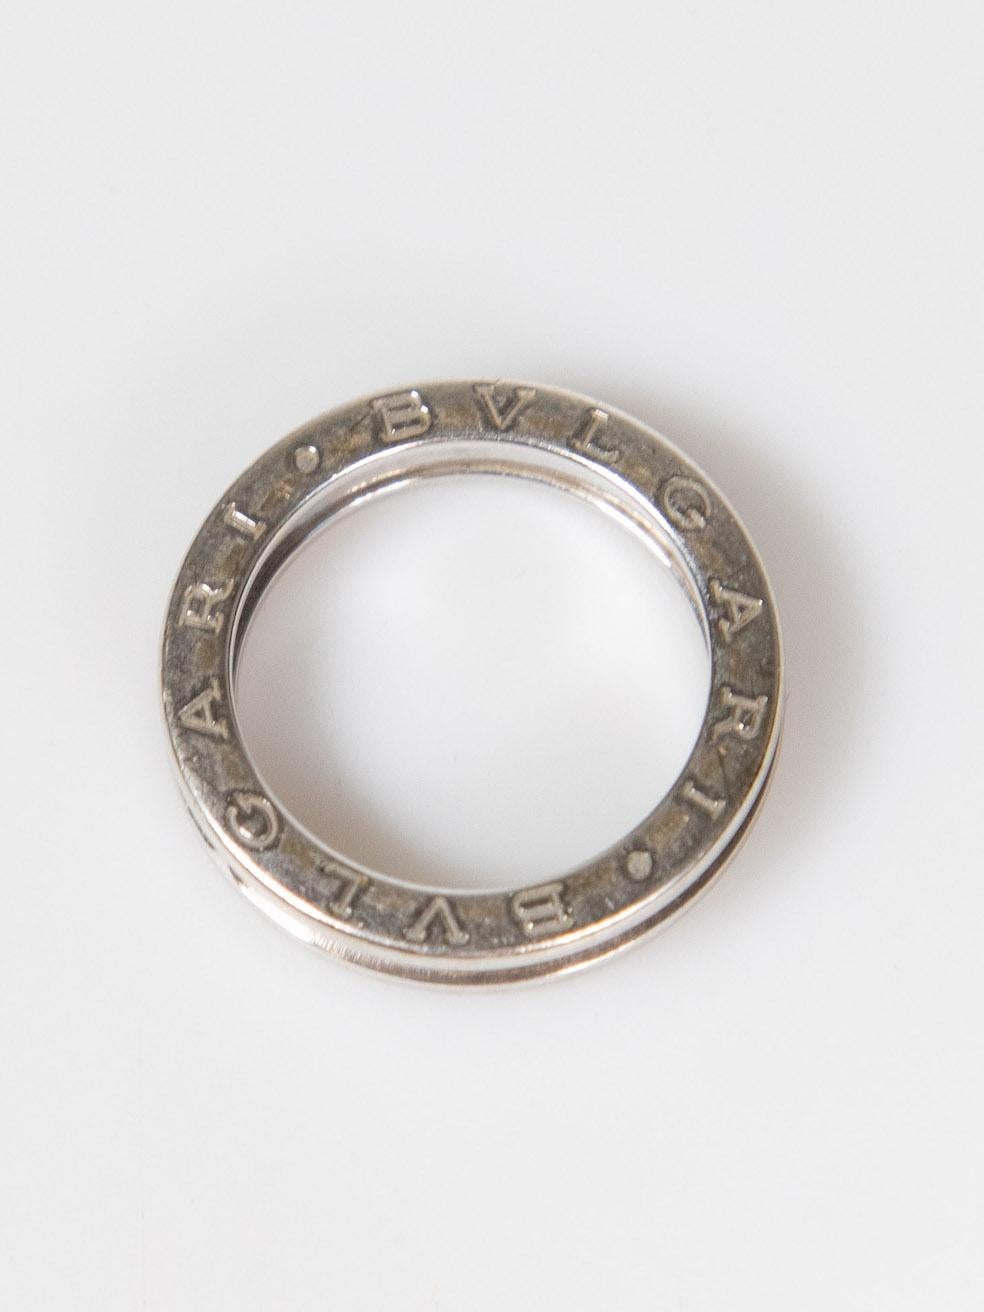 Bvlgari White Gold B.zero1 Engraved Ring In Excellent Condition For Sale In London, GB